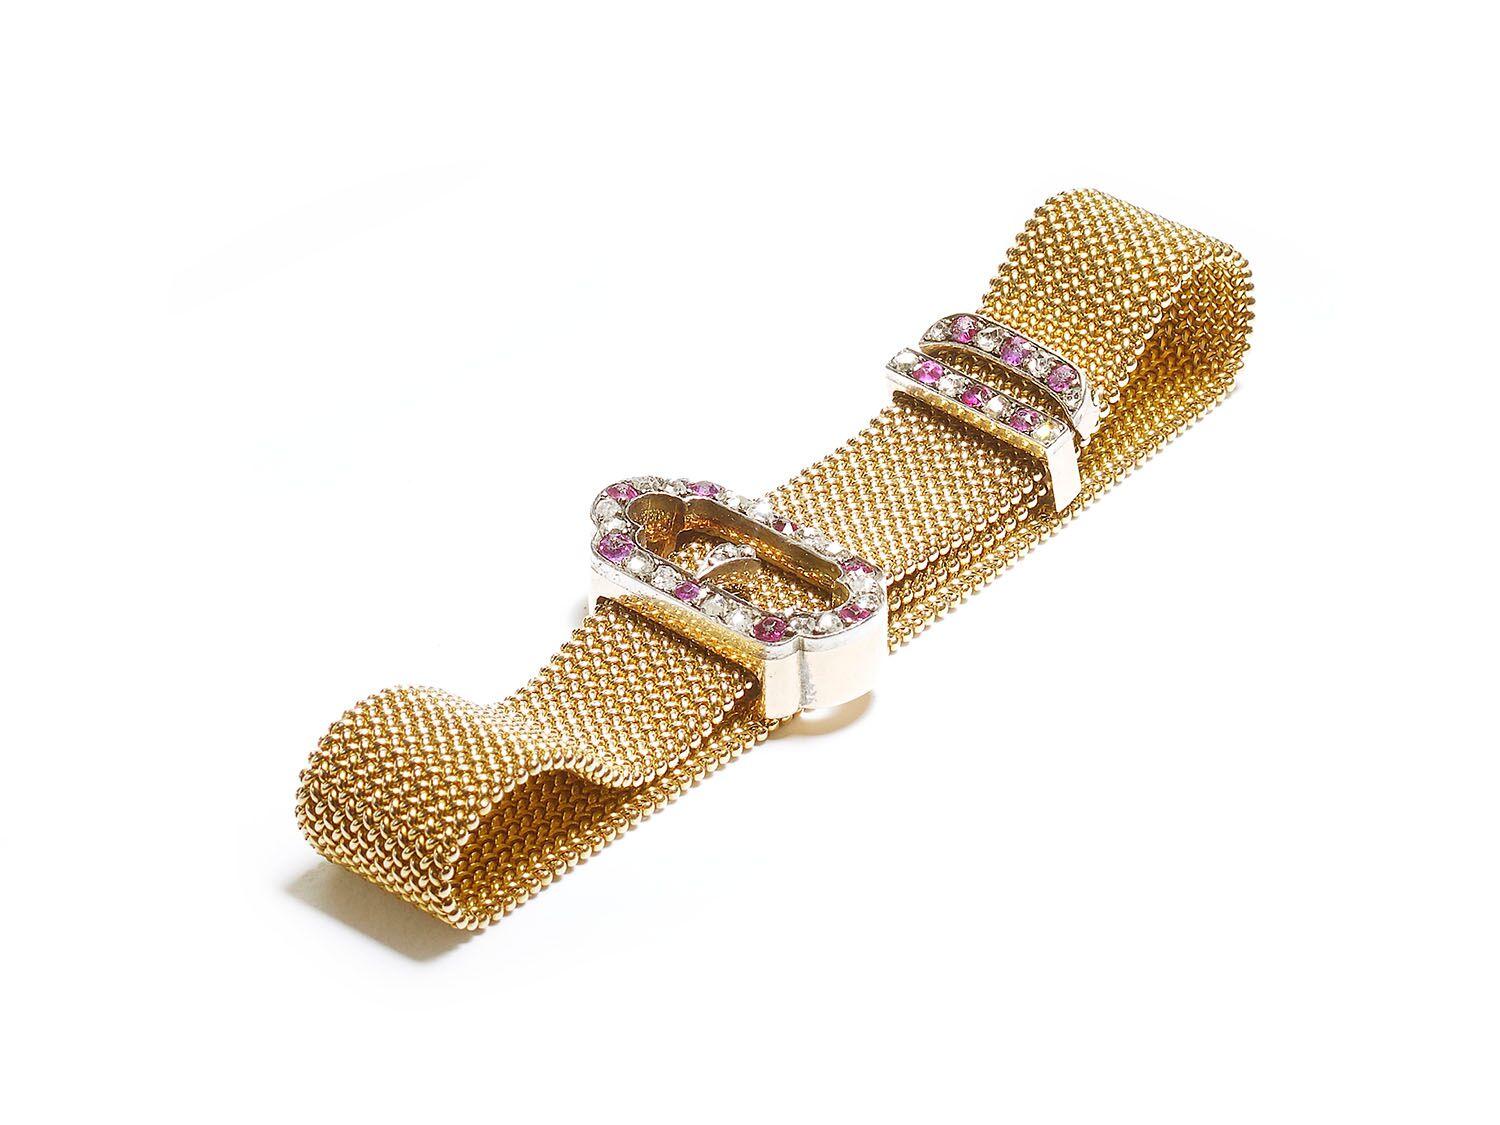 A late 19th century, gold mesh mail buckle bracelet, set with Burma rubies and rose-cut diamonds, in a silver set sliding buckle, sliding loop and terminal, on gold mesh mail. English, circa 1890. The buckle is approximately 26.9 x 14mm. The length